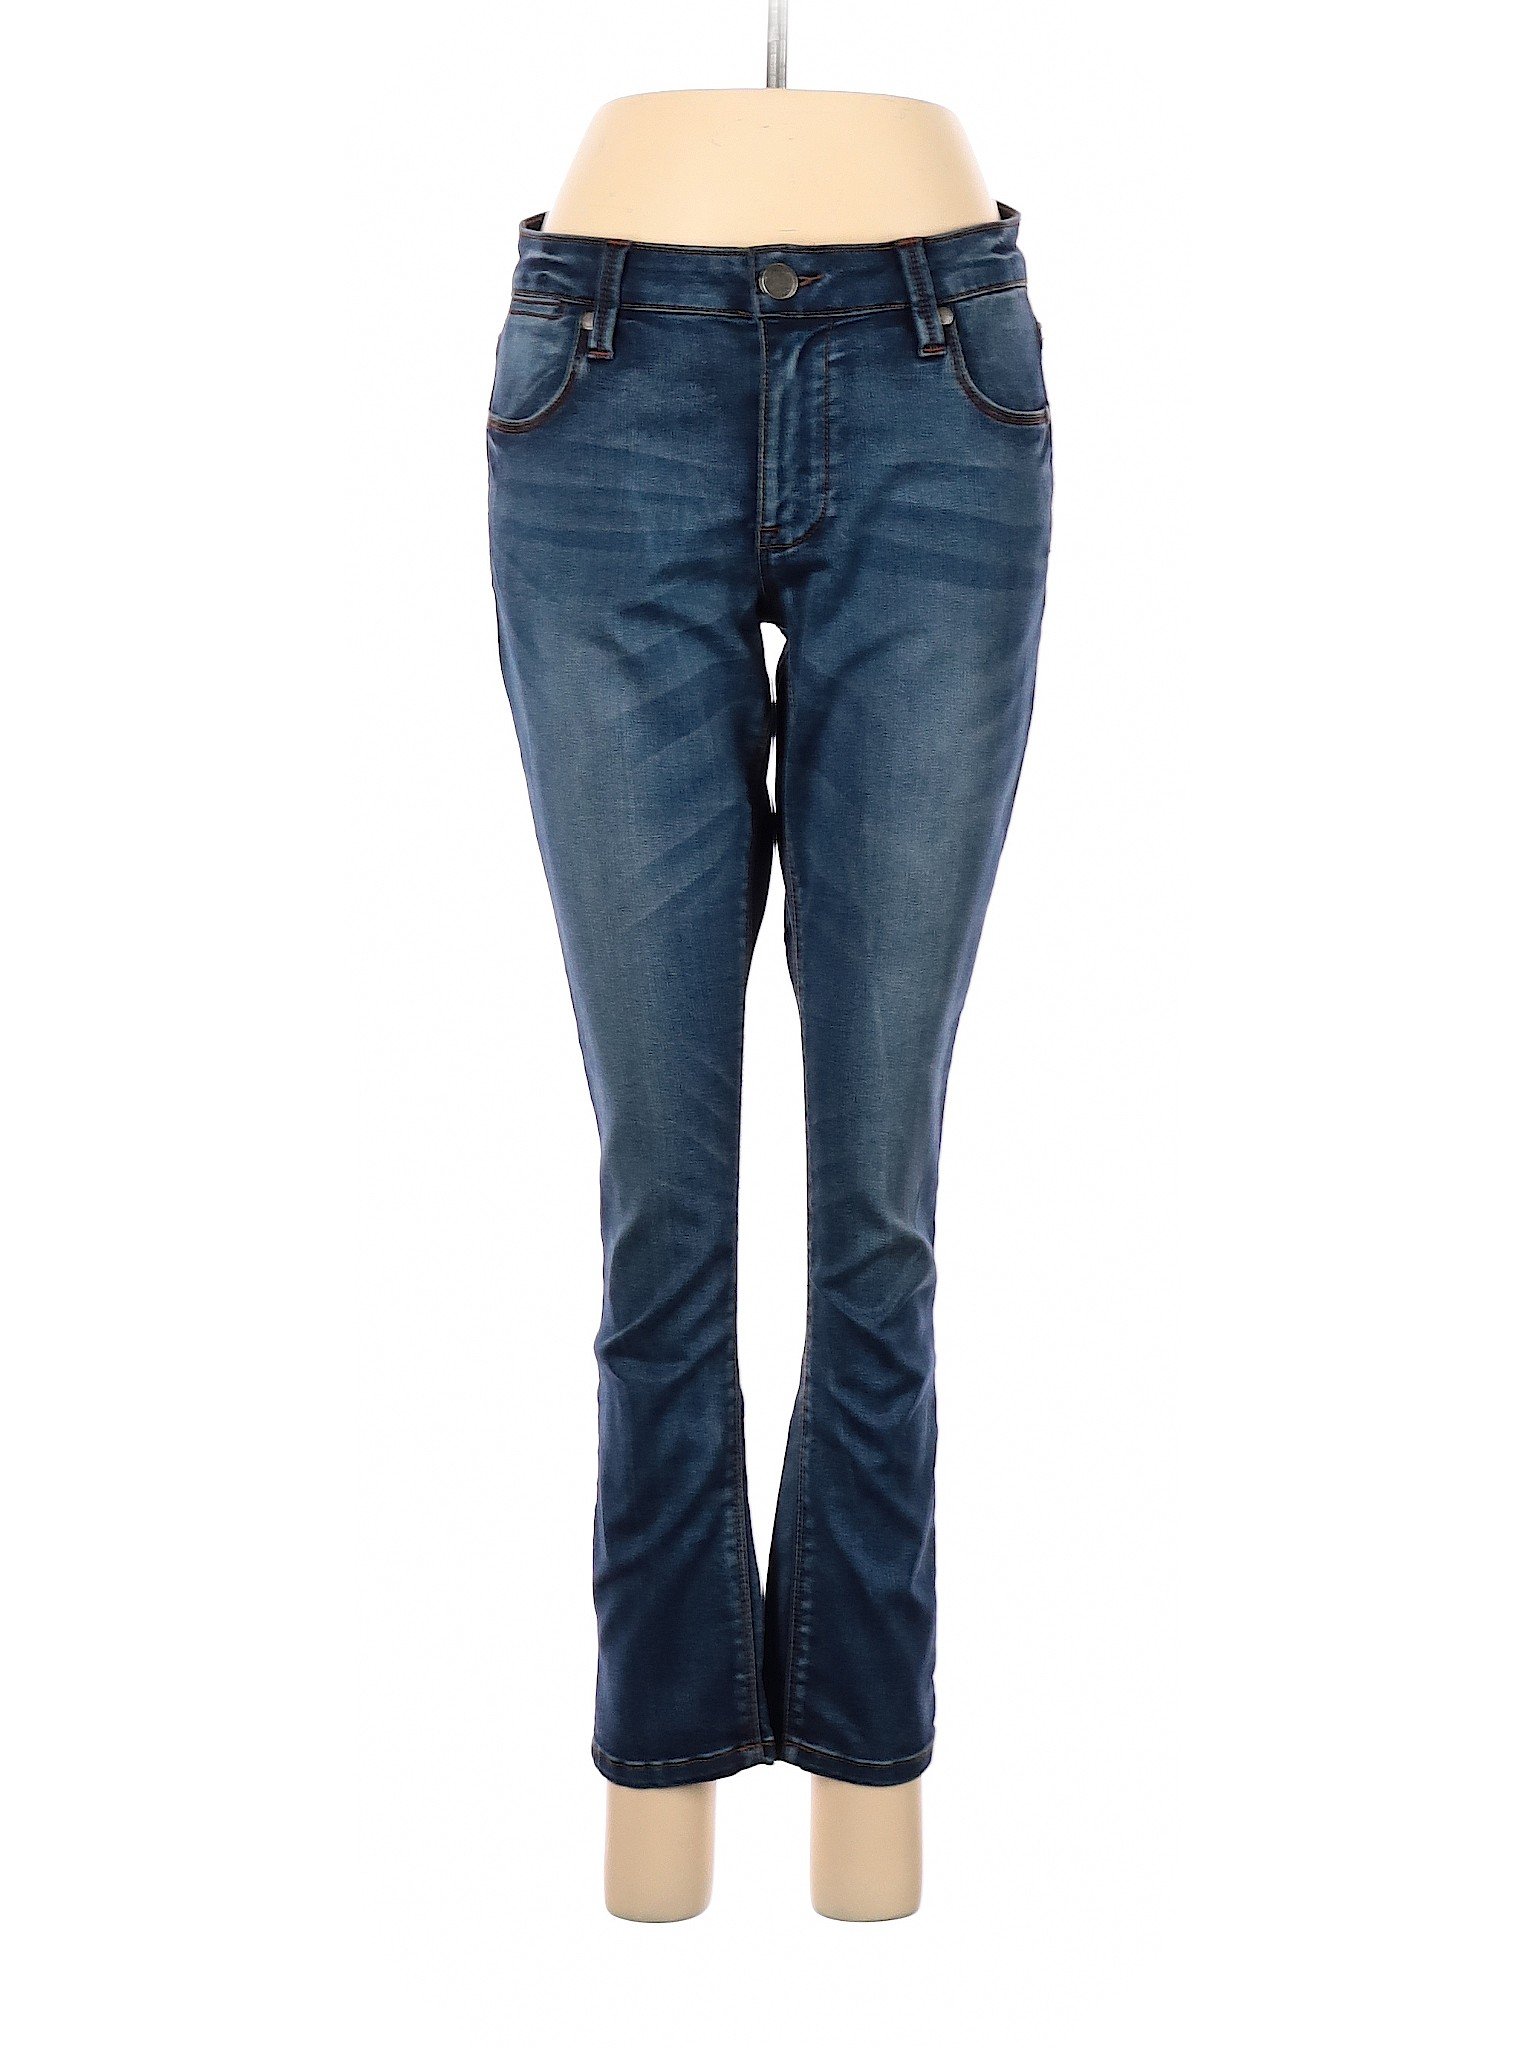 April Jeans Women's Max Jeans On Sale Up To 90% Off Retail | thredUP